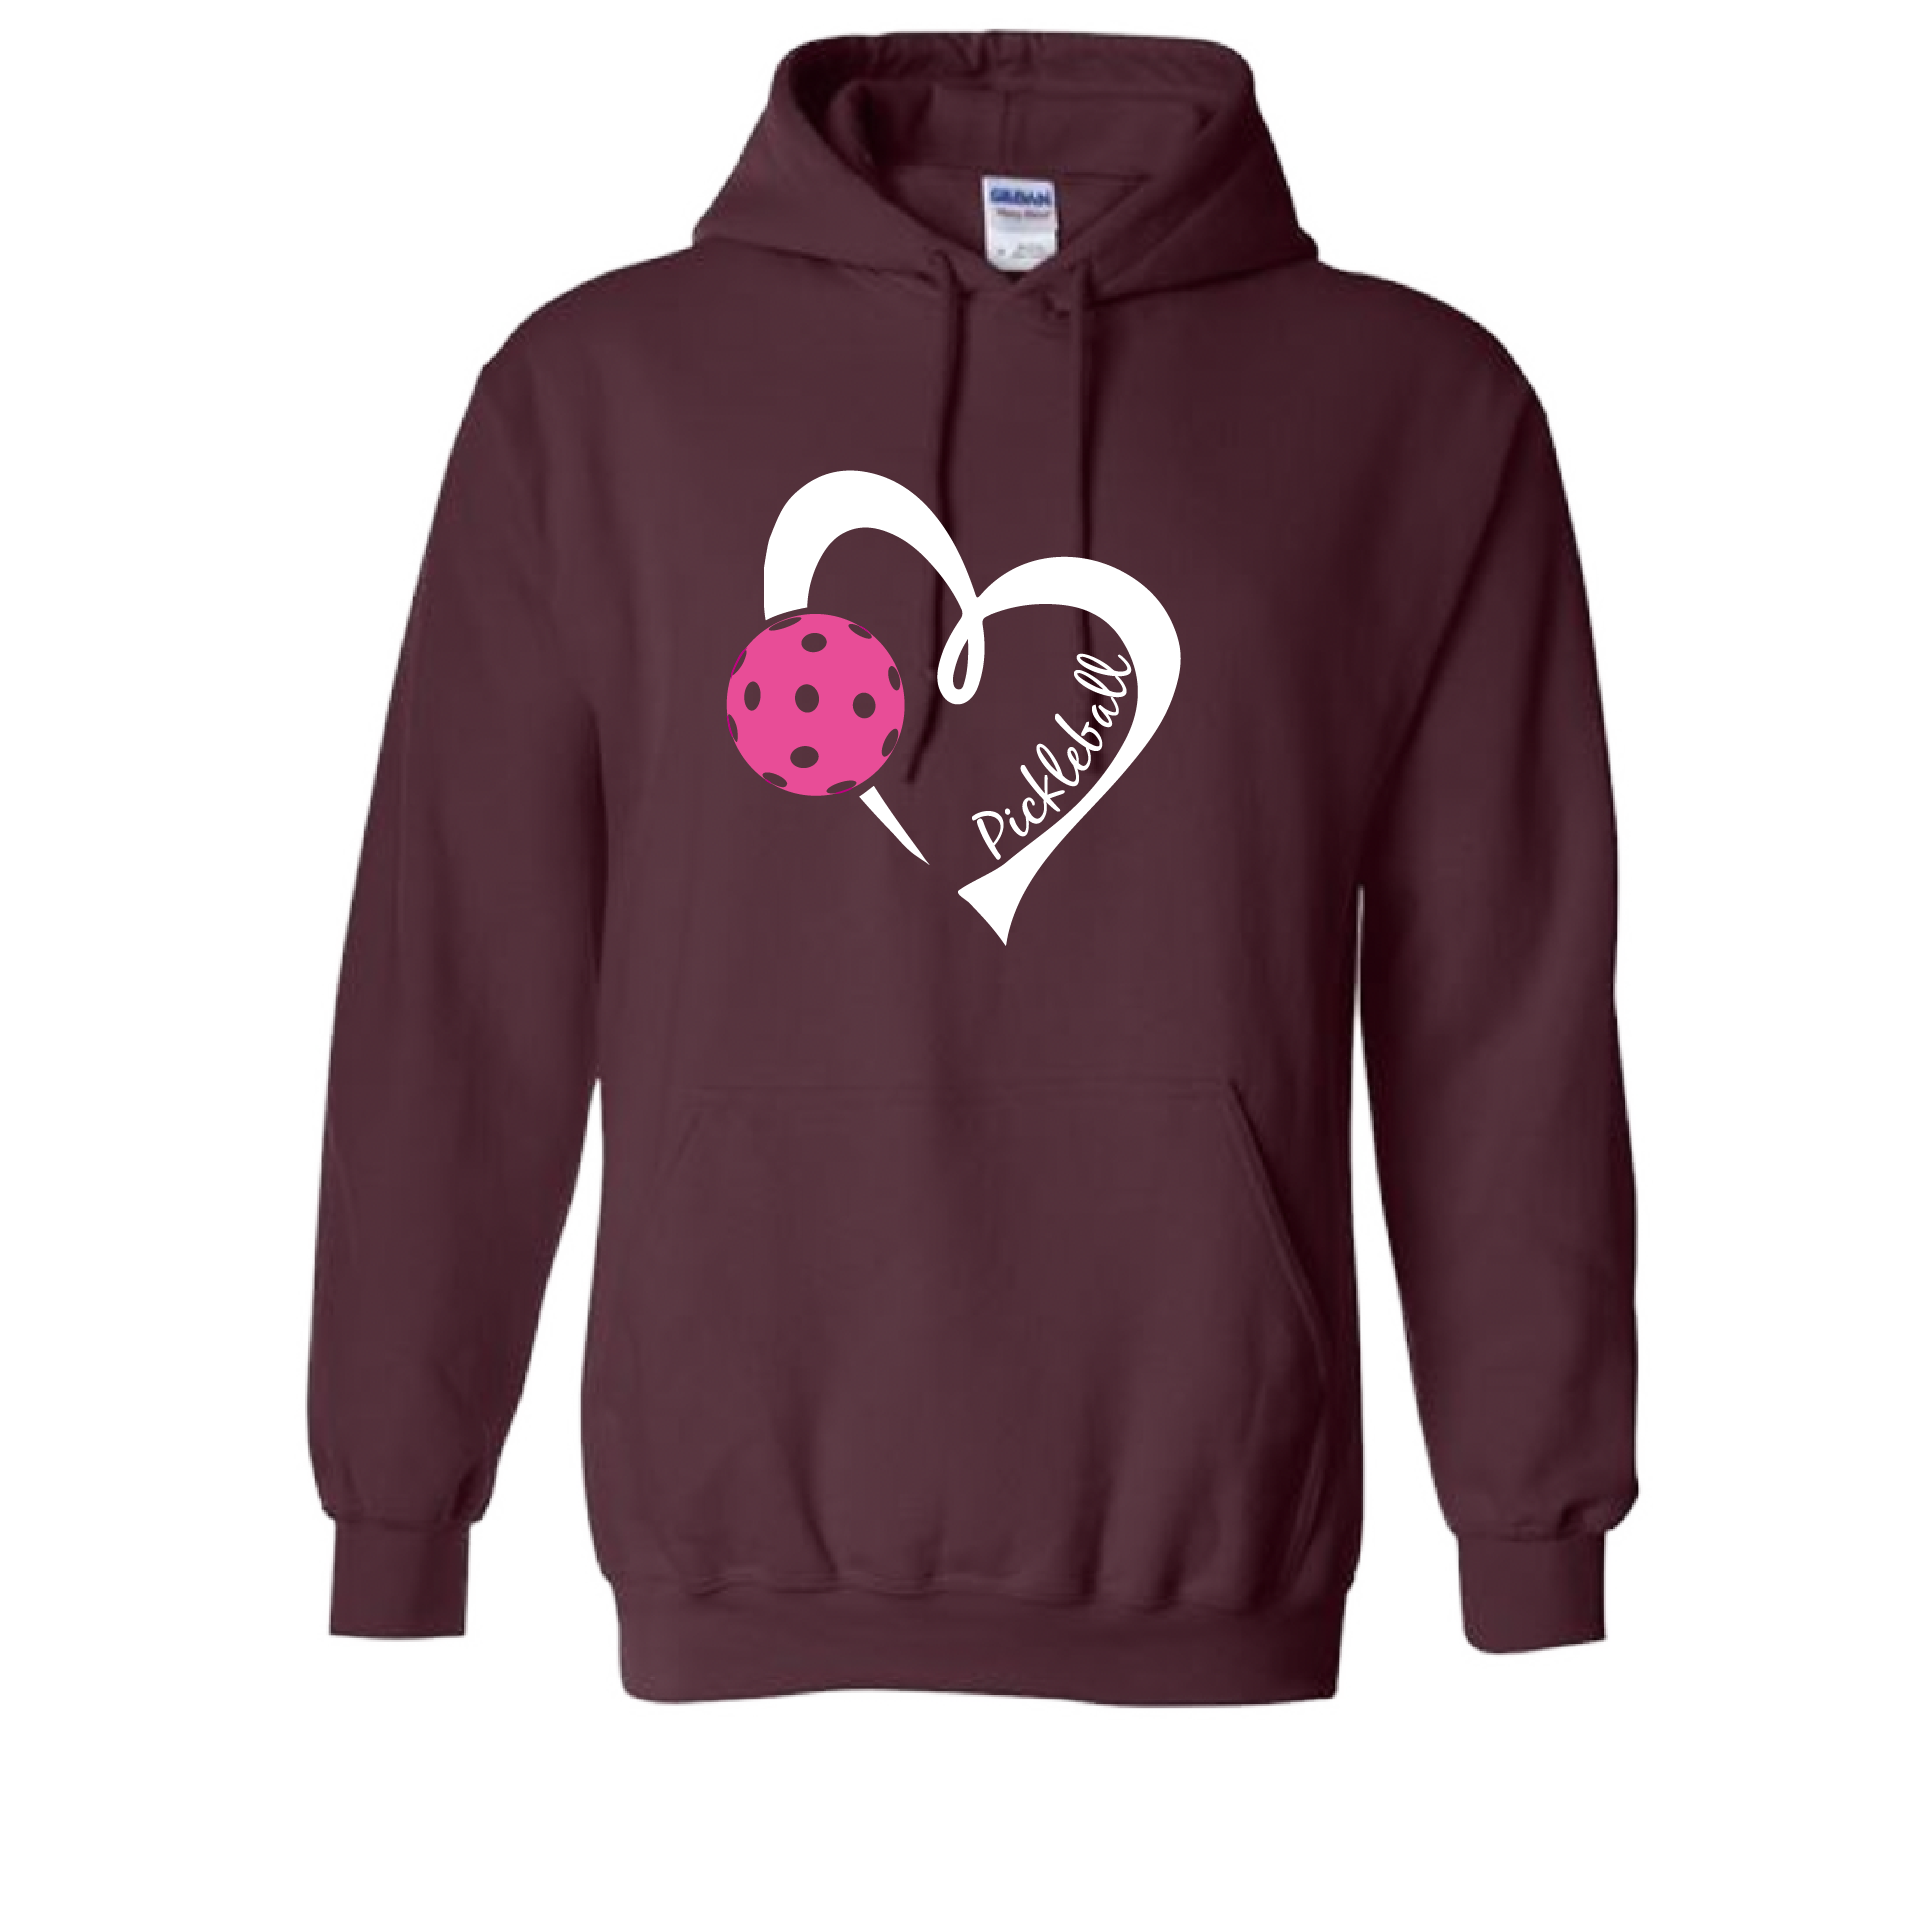 Pickleball Design: Heart with Pickleball  Unisex Hooded Sweatshirt: Moisture-wicking, double-lined hood, front pouch pocket.  This unisex hooded sweatshirt is ultra comfortable and soft. Stay warm on the Pickleball courts while being that hit with this one of kind design.